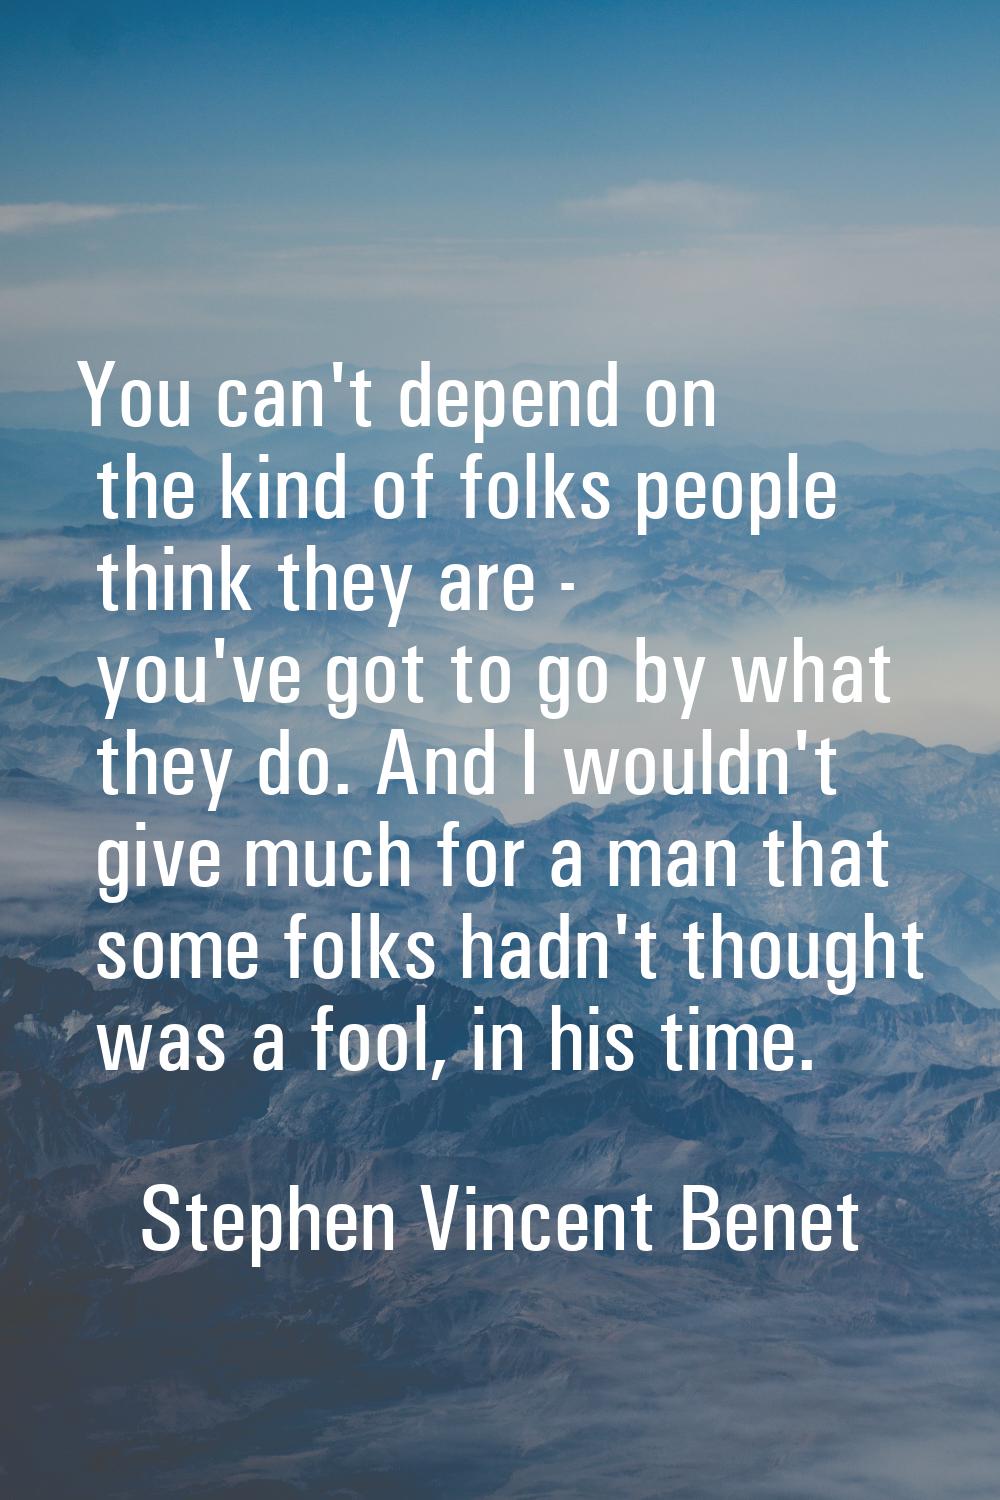 You can't depend on the kind of folks people think they are - you've got to go by what they do. And